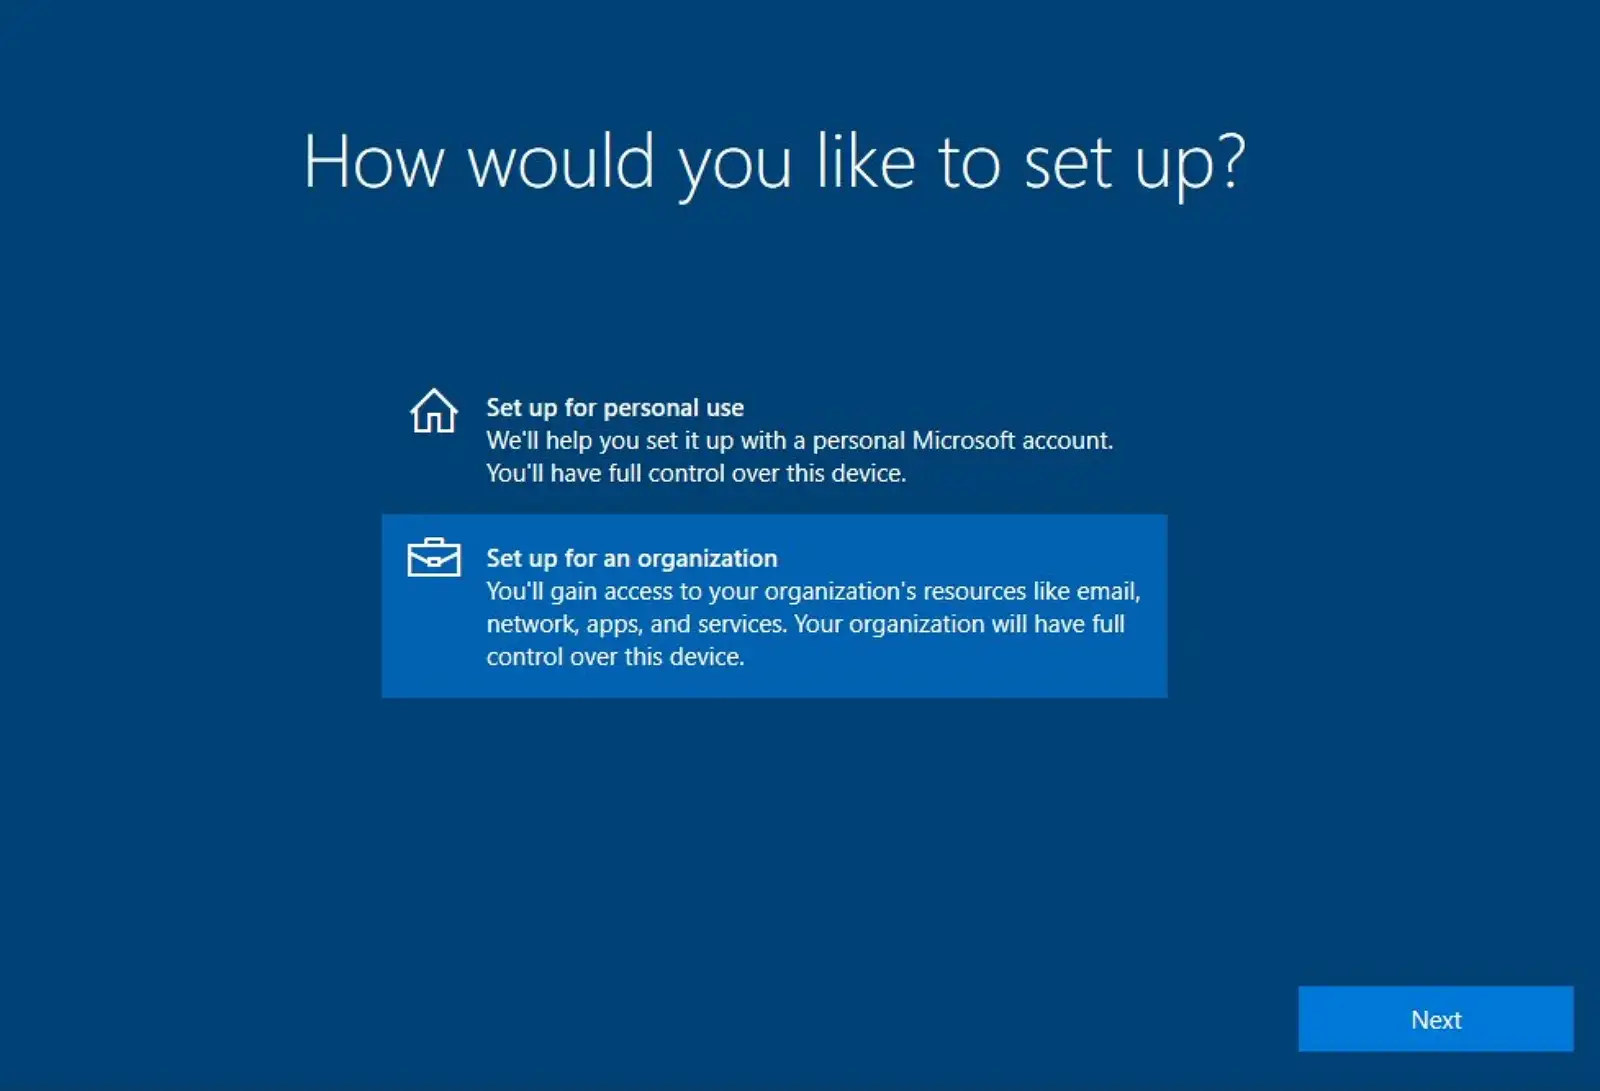 How to Make a Microsoft Account in a Few Simple Steps